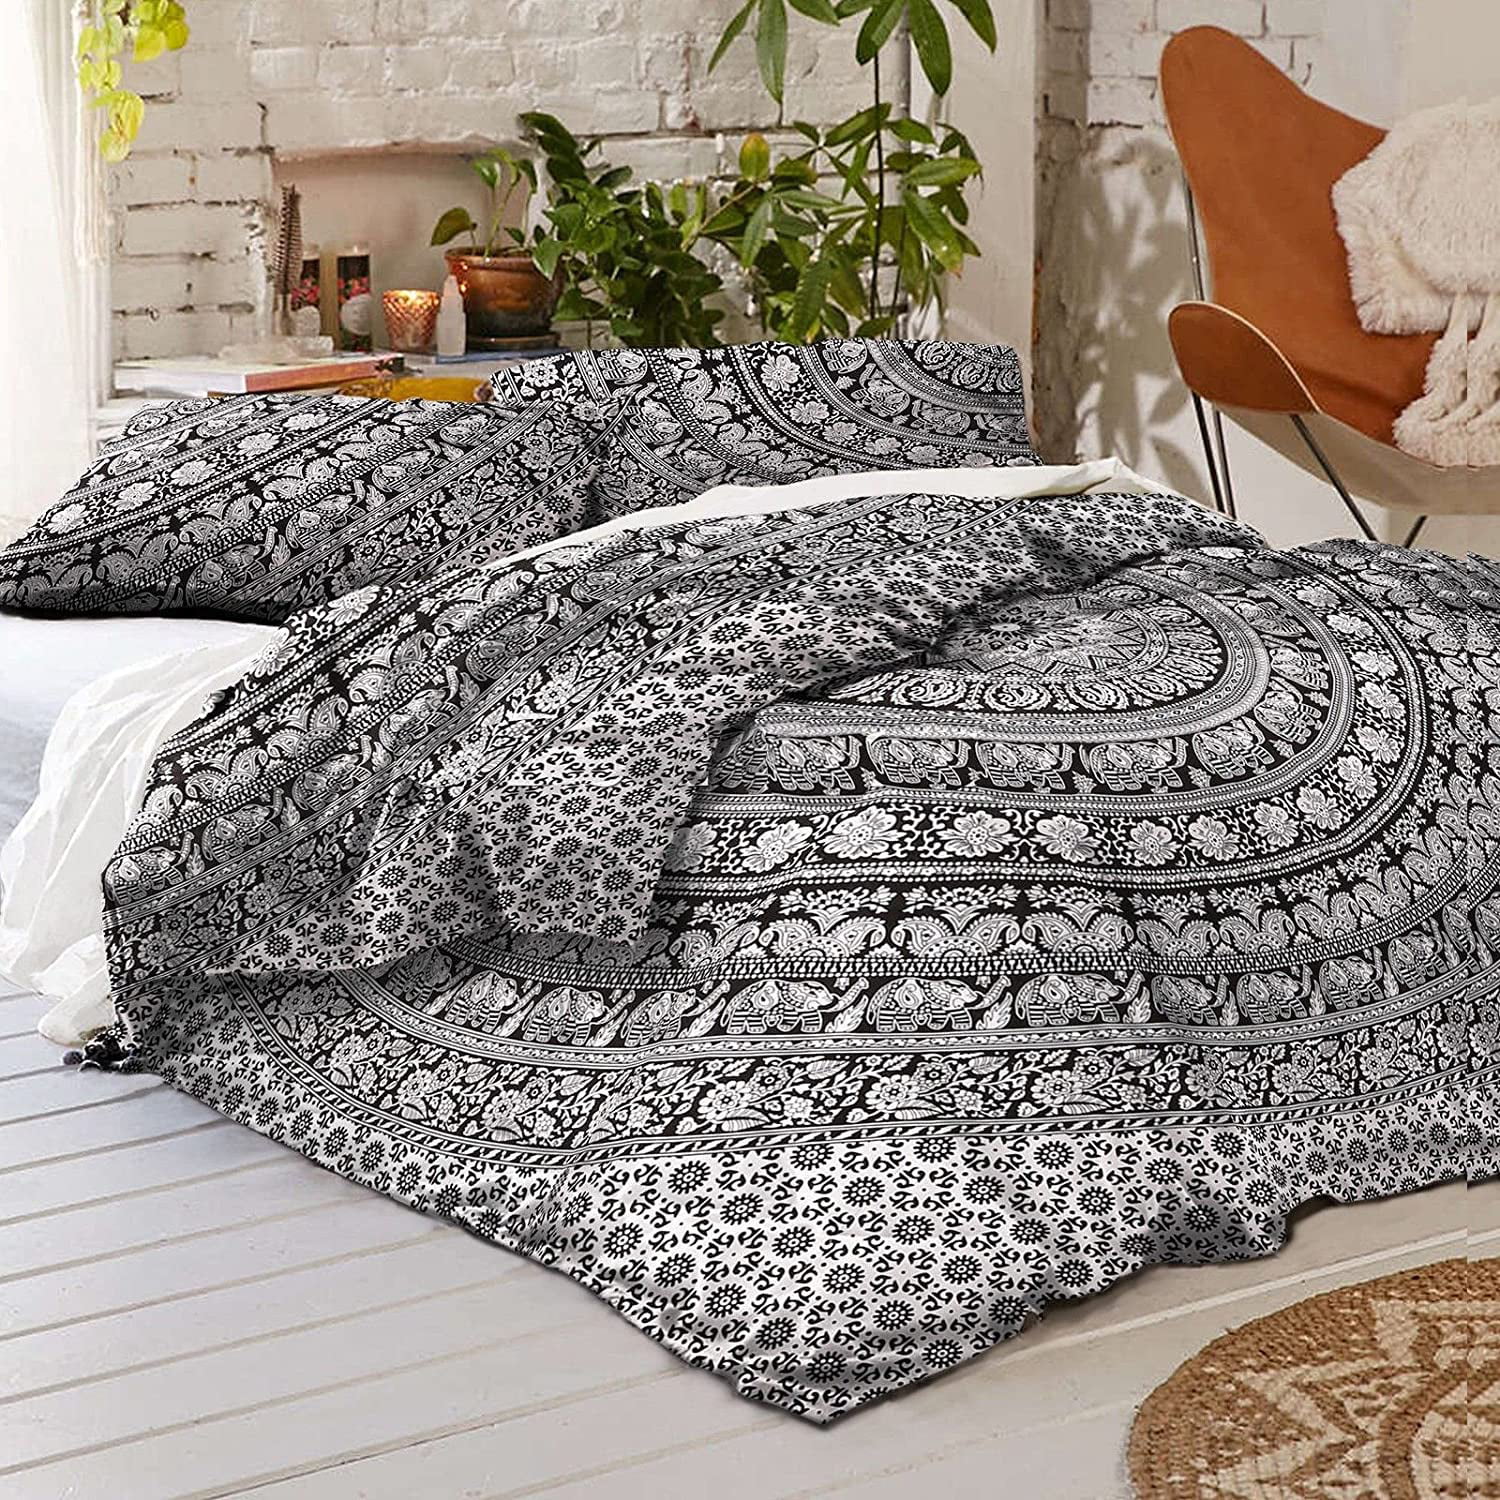 Indian mandala Duvet Cover Twin Size Quilt Cover Bedding Donna Cover with Pillow 